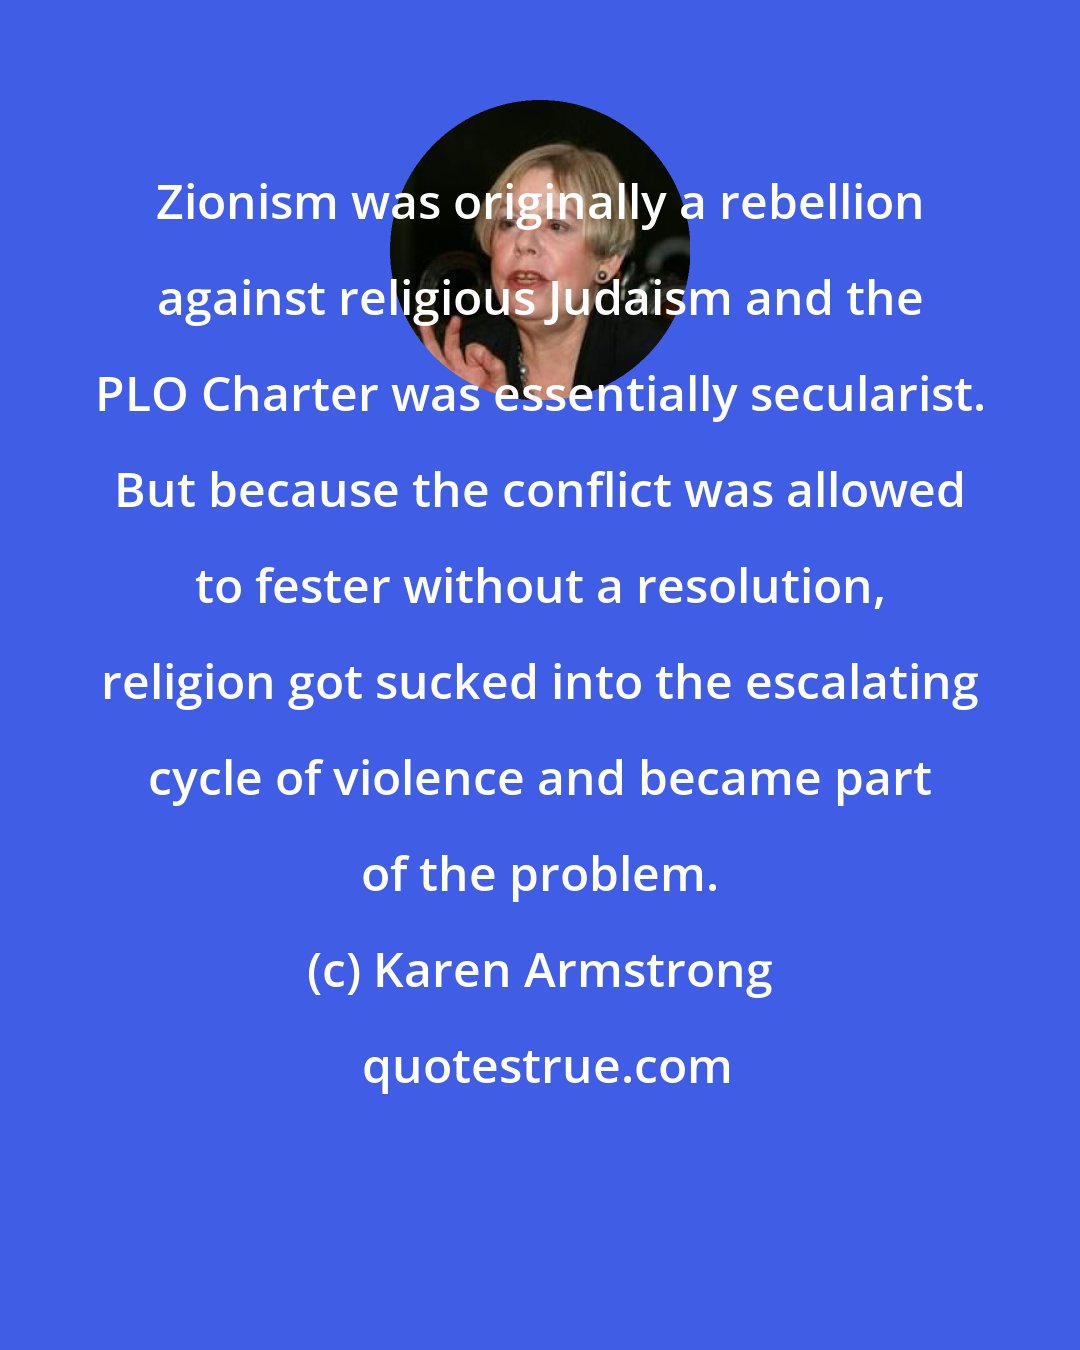 Karen Armstrong: Zionism was originally a rebellion against religious Judaism and the PLO Charter was essentially secularist. But because the conflict was allowed to fester without a resolution, religion got sucked into the escalating cycle of violence and became part of the problem.